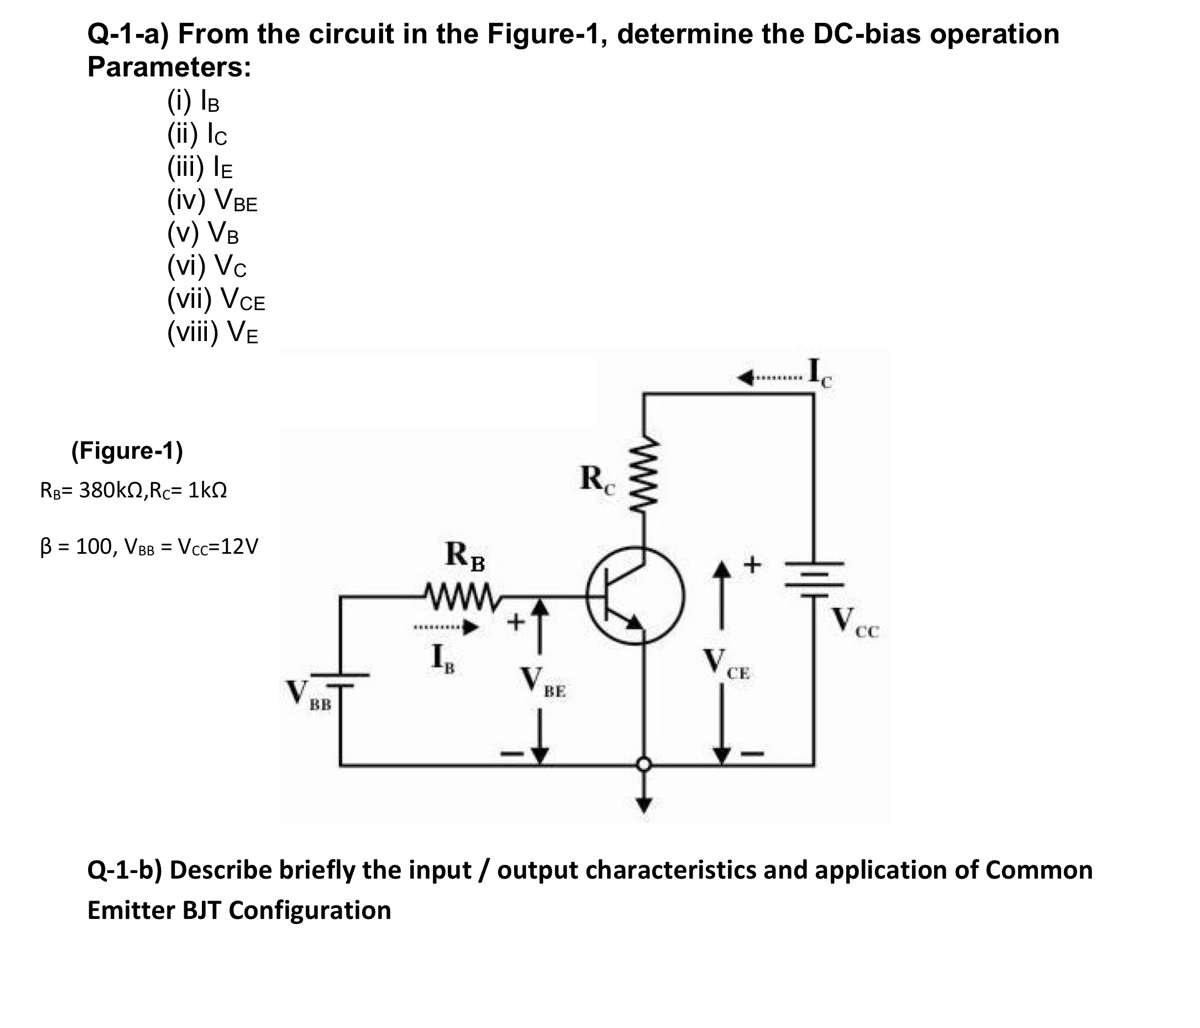 Q-1-a) From the circuit in the Figure-1, determine the DC-bias operation
Parameters:
(i) IB
(ii) Ic
(iii) le
(iv) VBE
(v) VB
(vi) Vc
(vii) VCE
(viii) Ve
(Figure-1)
Re
RB= 380kN,Rc= 1kN
B = 100, VBB = Vcc=12V
RB
ВЕ
BB
Q-1-b) Describe briefly the input / output characteristics and application of Common
Emitter BJT Configuration
ww
